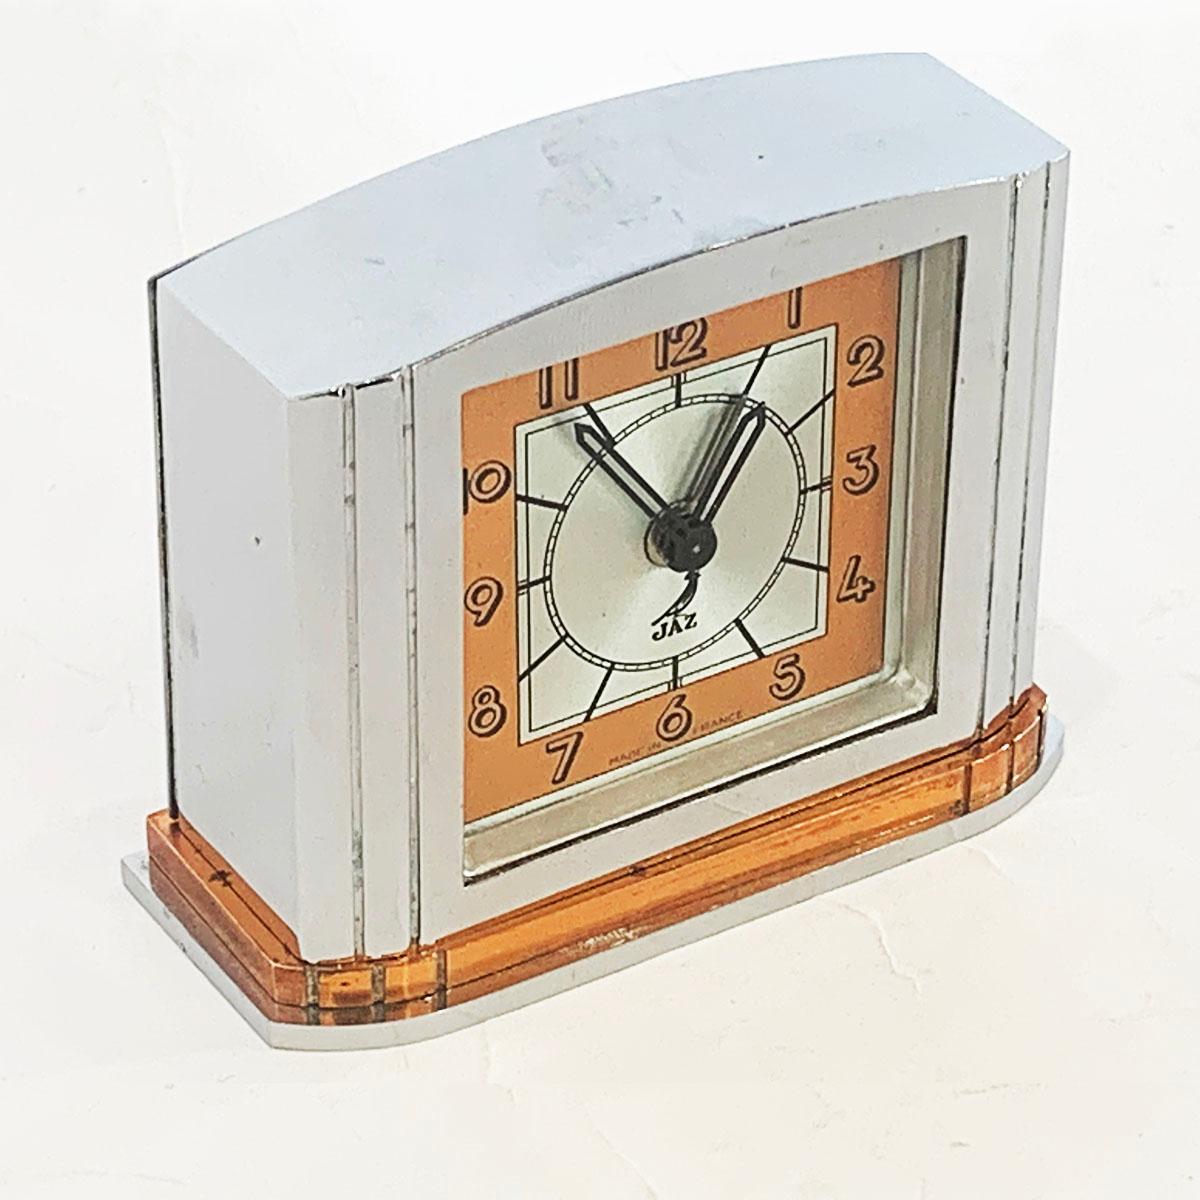 Art Deco French clock by Jazz. All in excellent condition, keeping good time and with a soft aged patina achieved from age. Satin chrome and copper face with black Arabic numerals, batons for minutes and “JAZZ” and the black crow, the company logo,